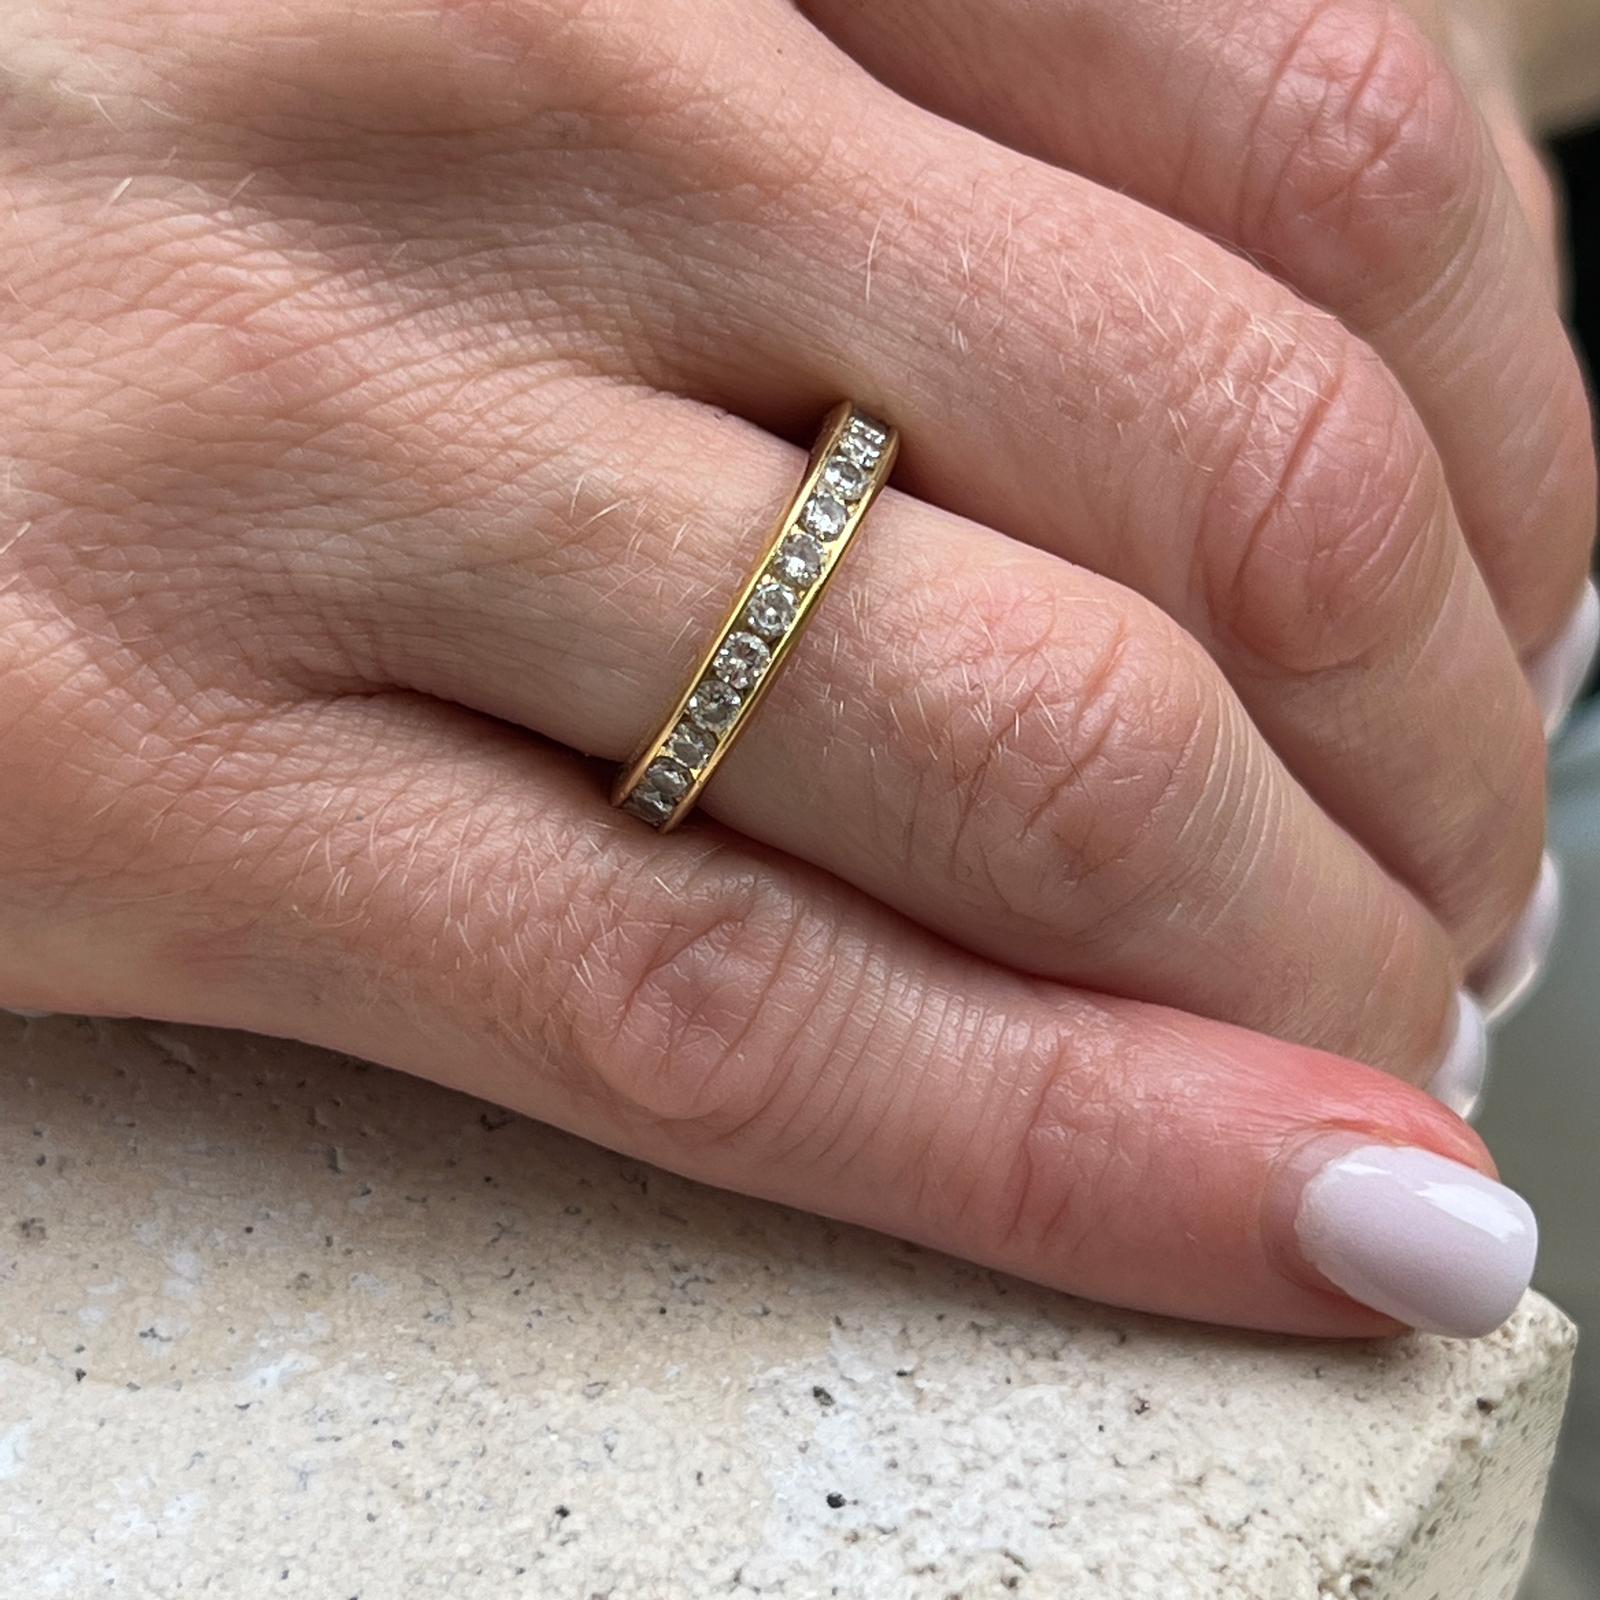 Diamond eternity band crafted in 18 karat yellow gold. The channel set diamonds weigh approximately 1.35 carat total weight and are graded H-I color and SI clarity. The band measures 3.5mm in width and is size 6. 